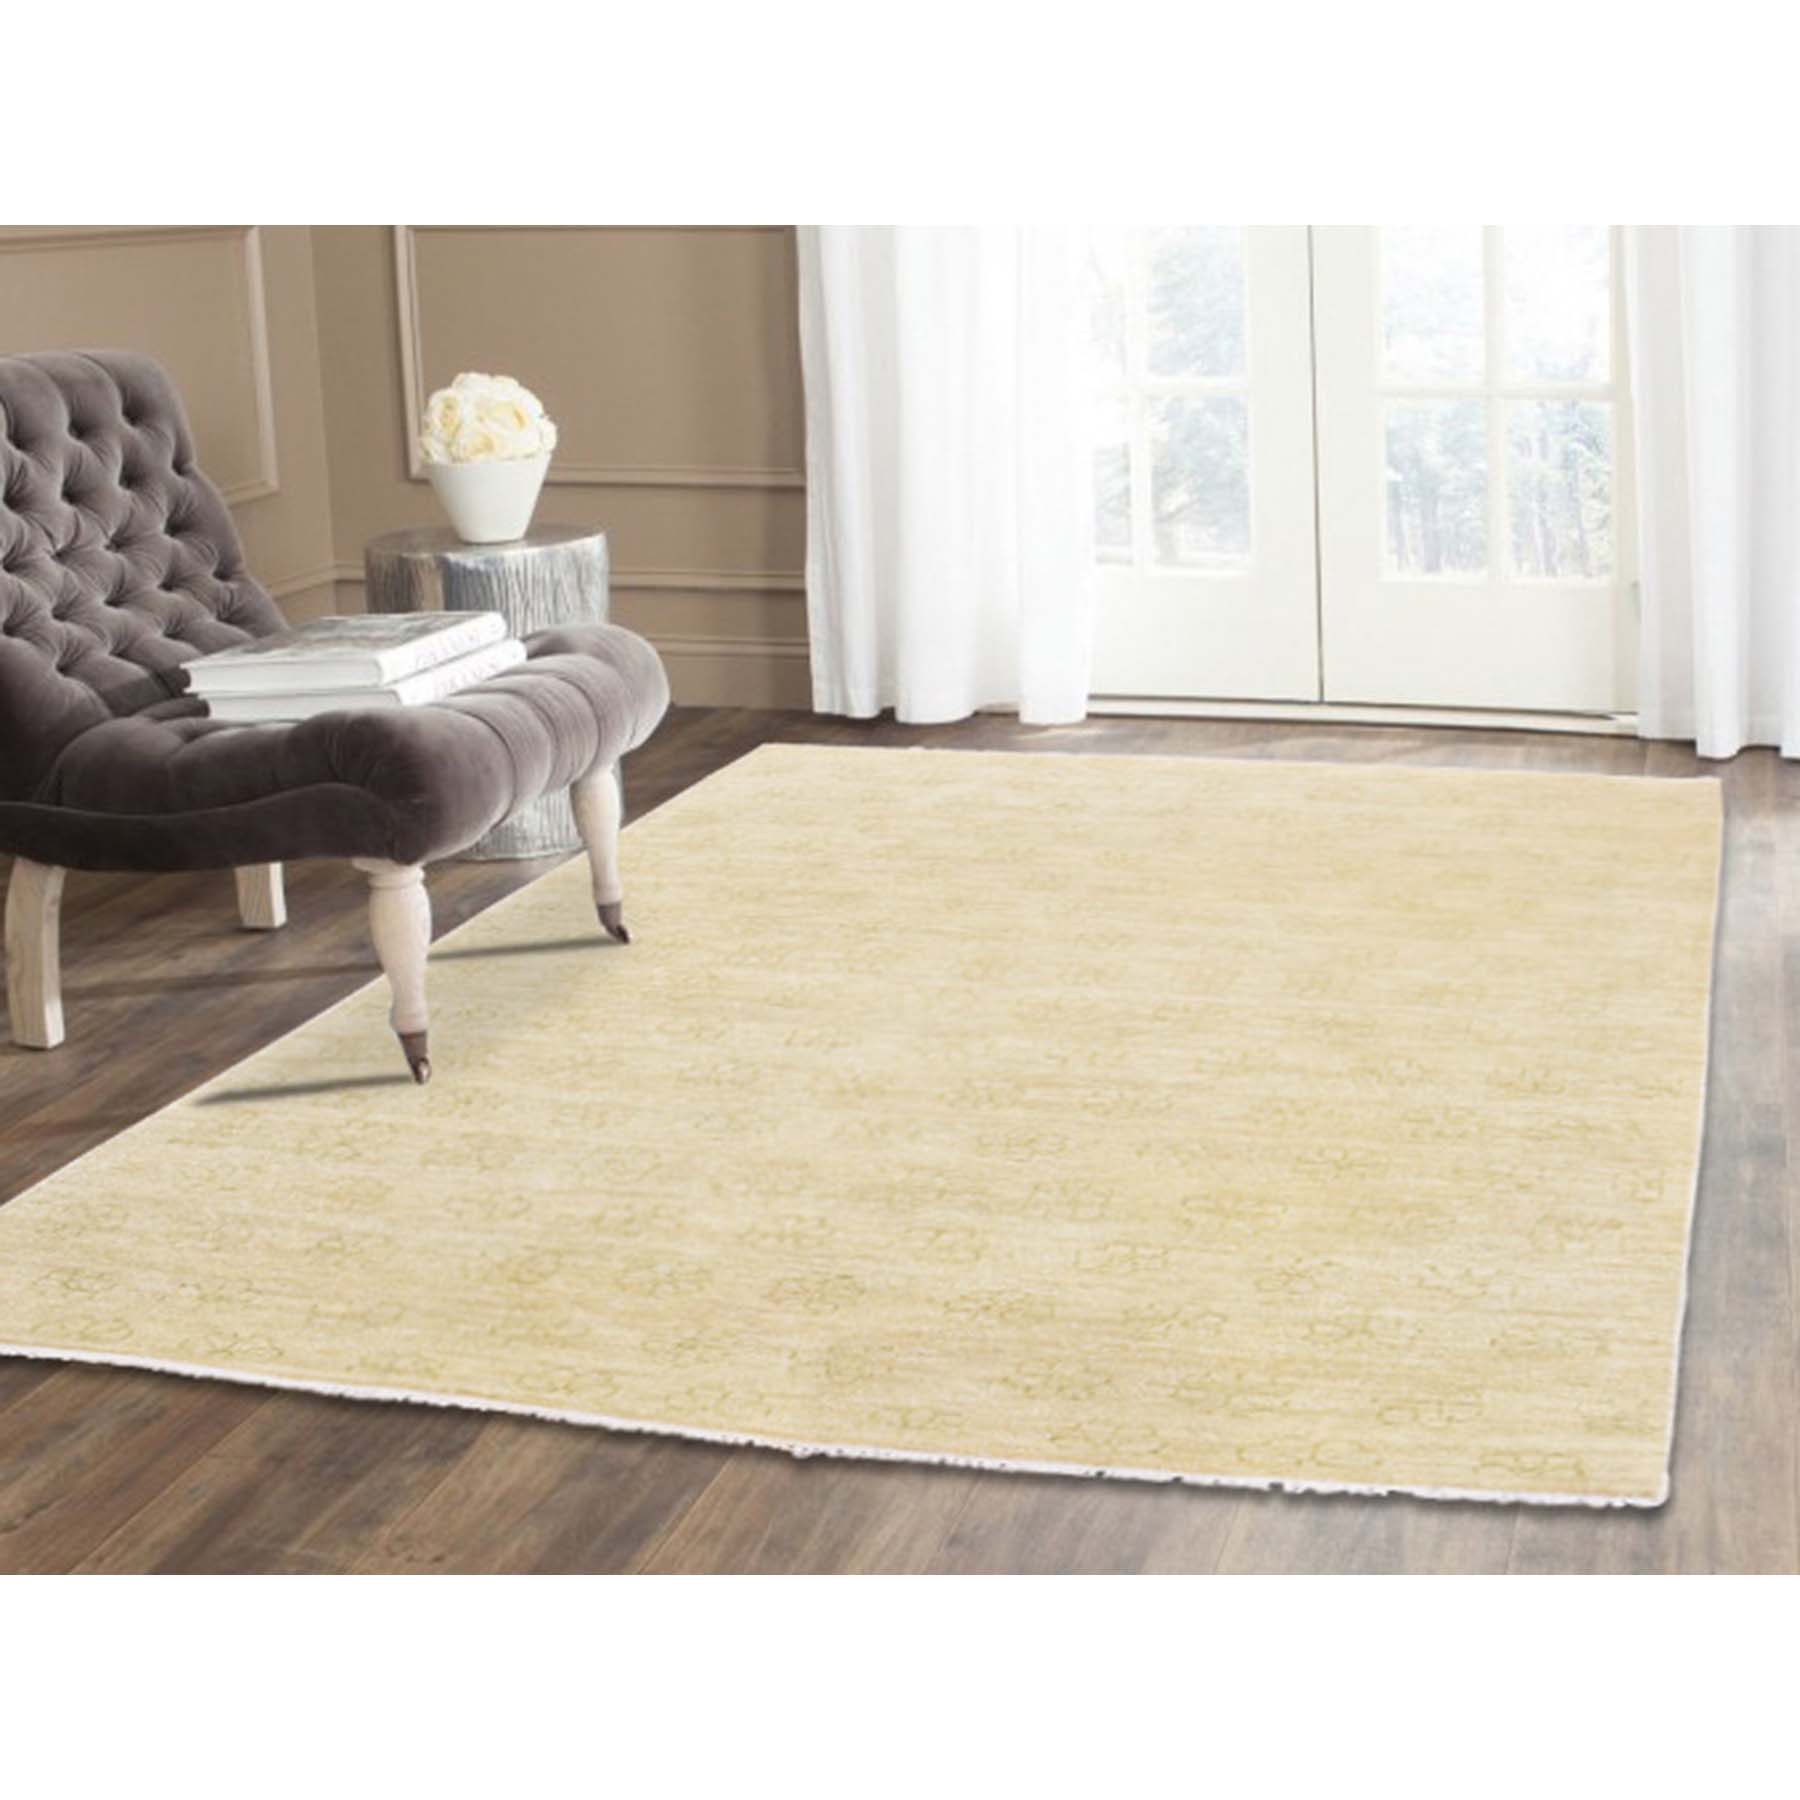 4-x6- Hand Knotted Pure Wool Agra Gabbeh With Flower Design Rug 